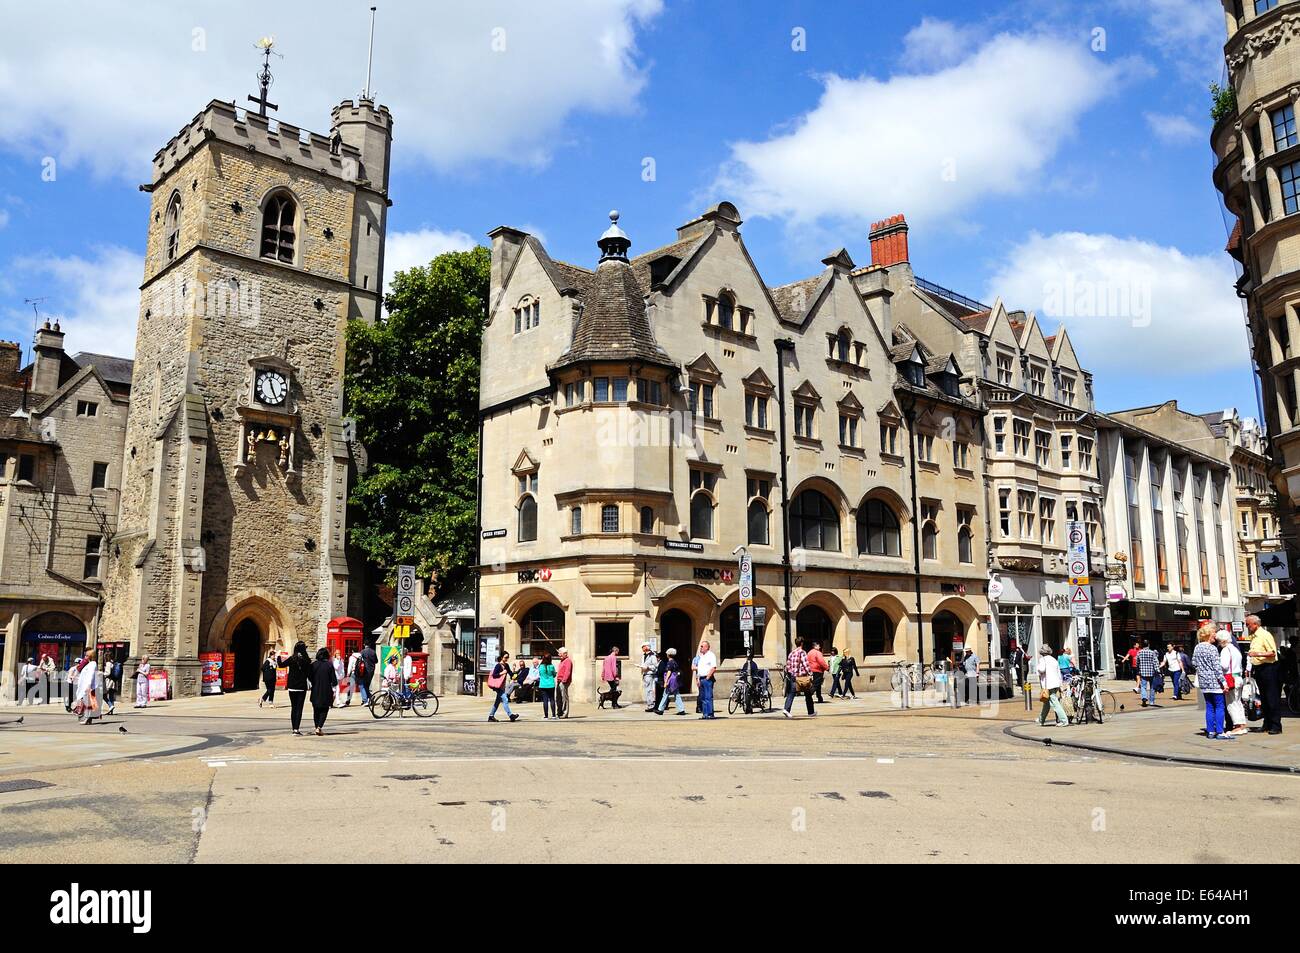 Carfax tower on the corner of St. Aldates, Cornmarket Street, High Street and Queen Street, Oxford, Oxfordshire, England, UK. Stock Photo